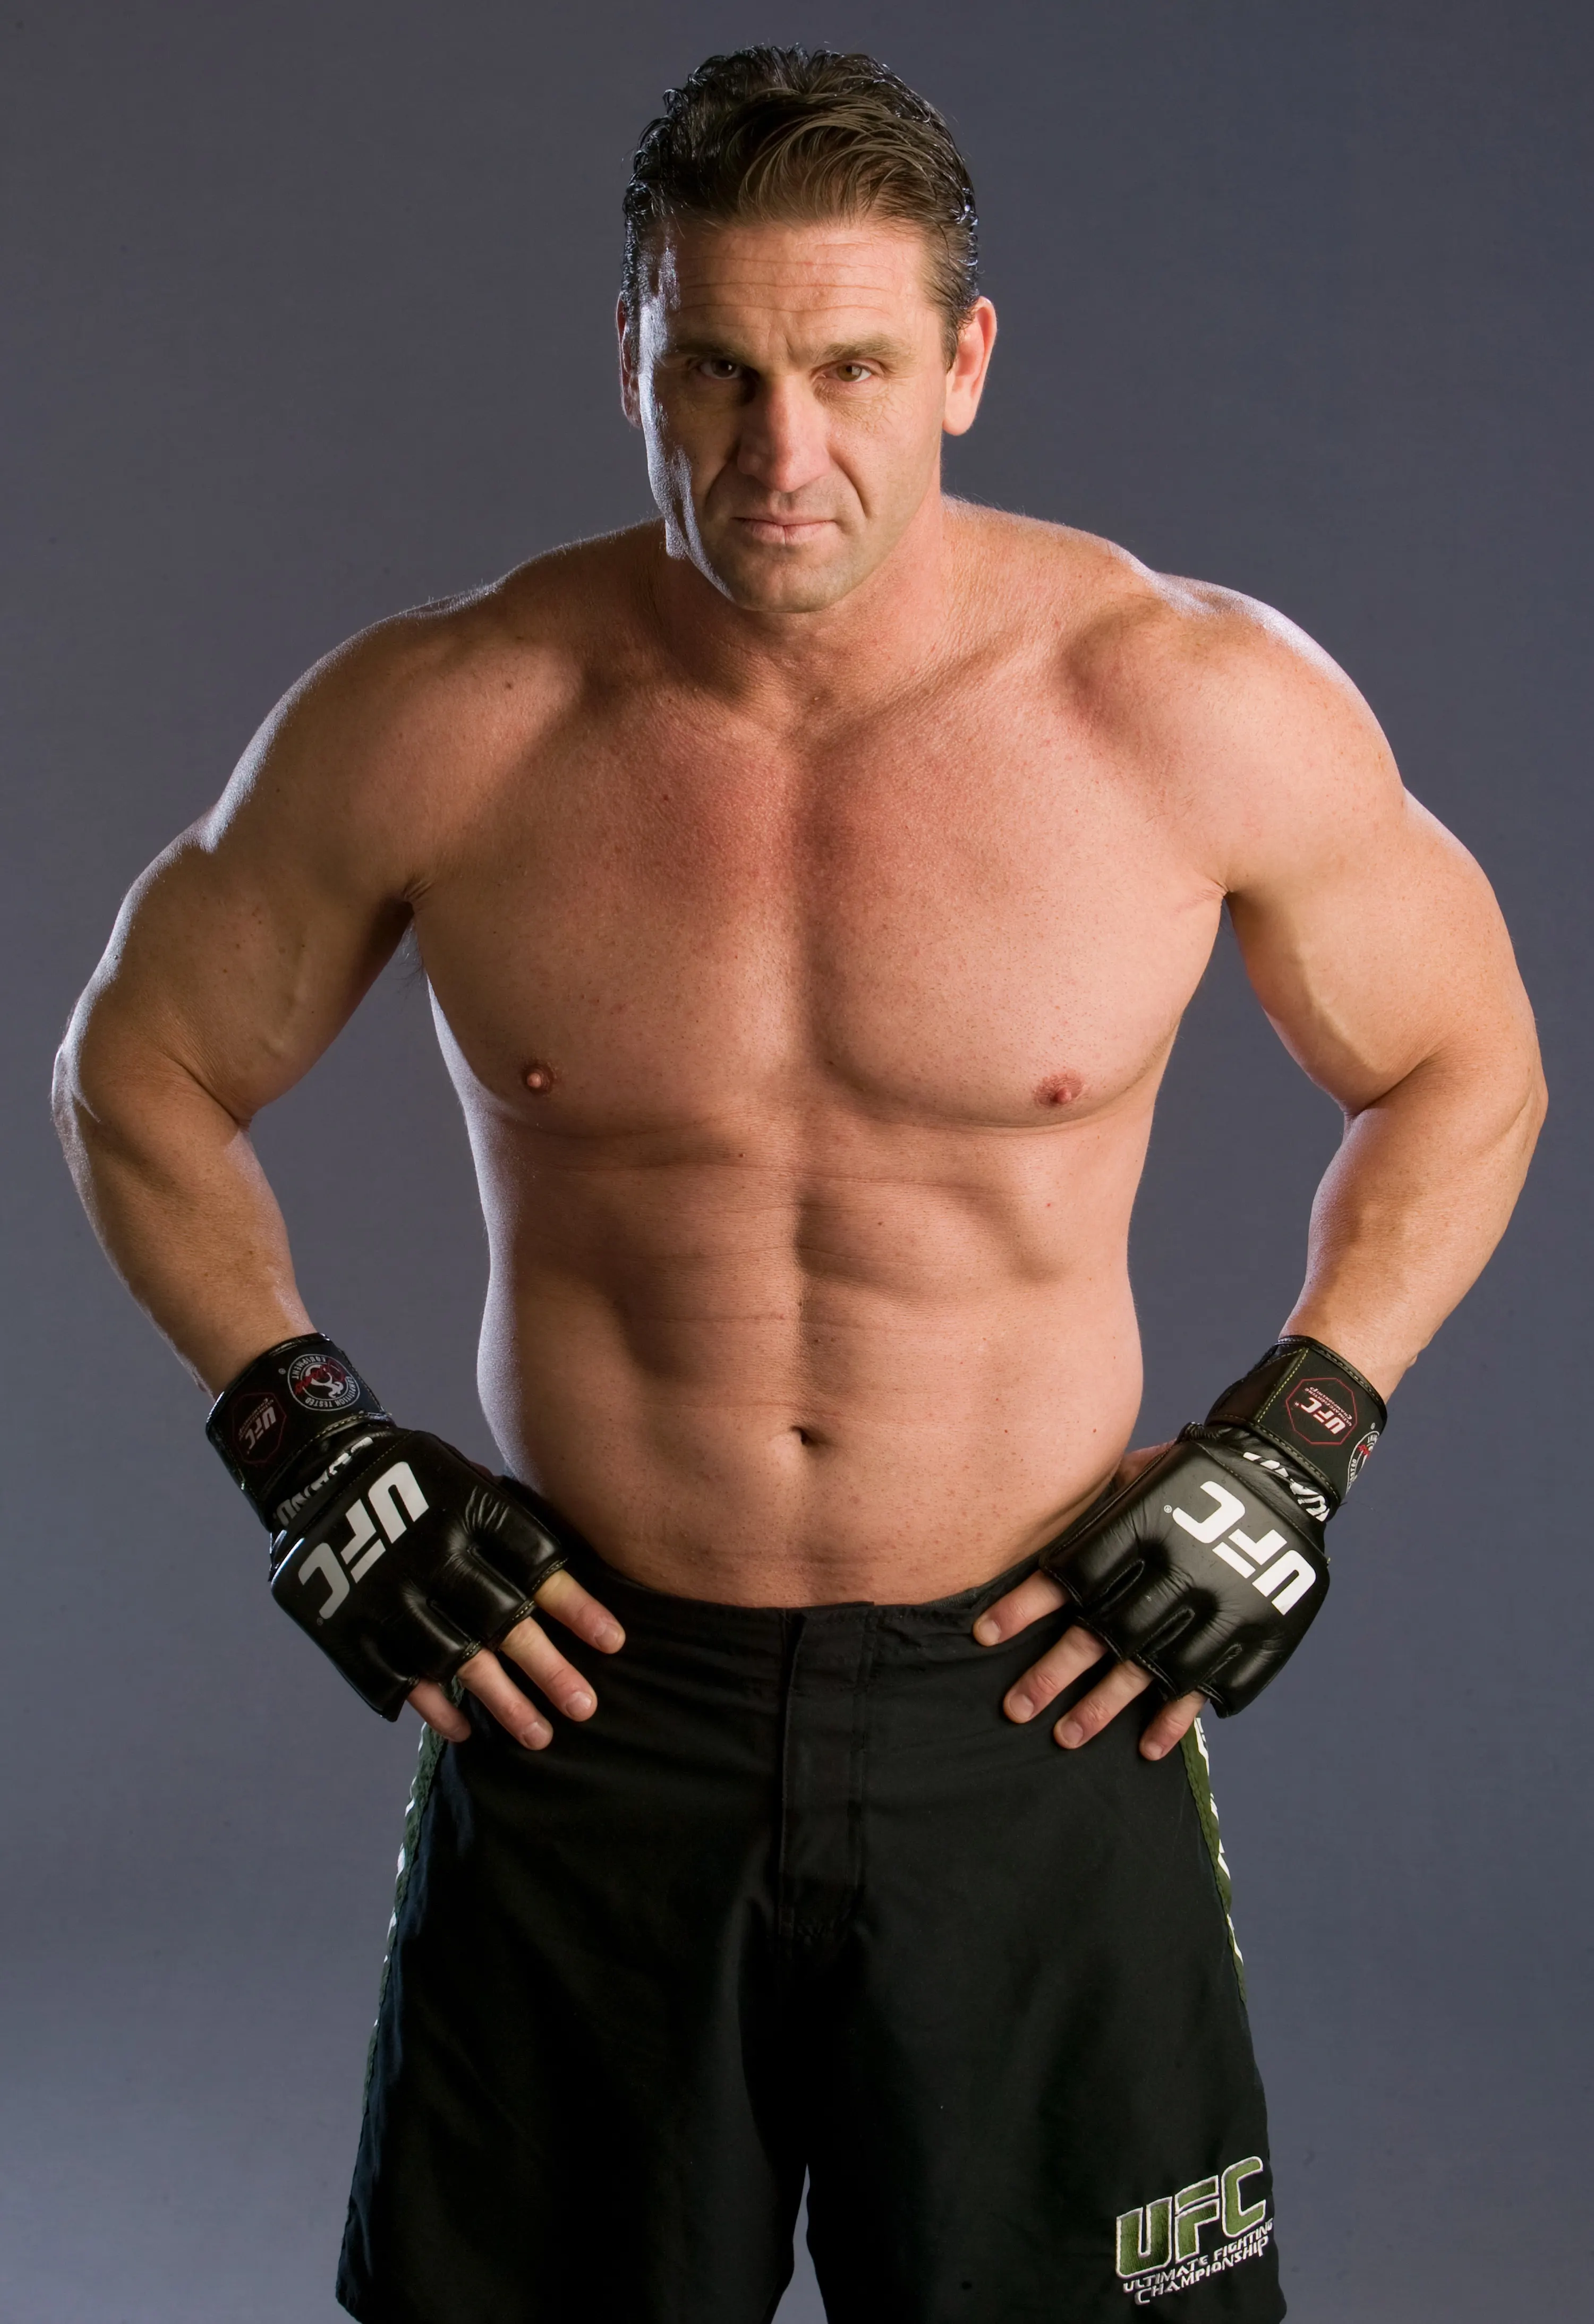 Why UFC Hall of Famer Ken Shamrock is considered 'The world’s most